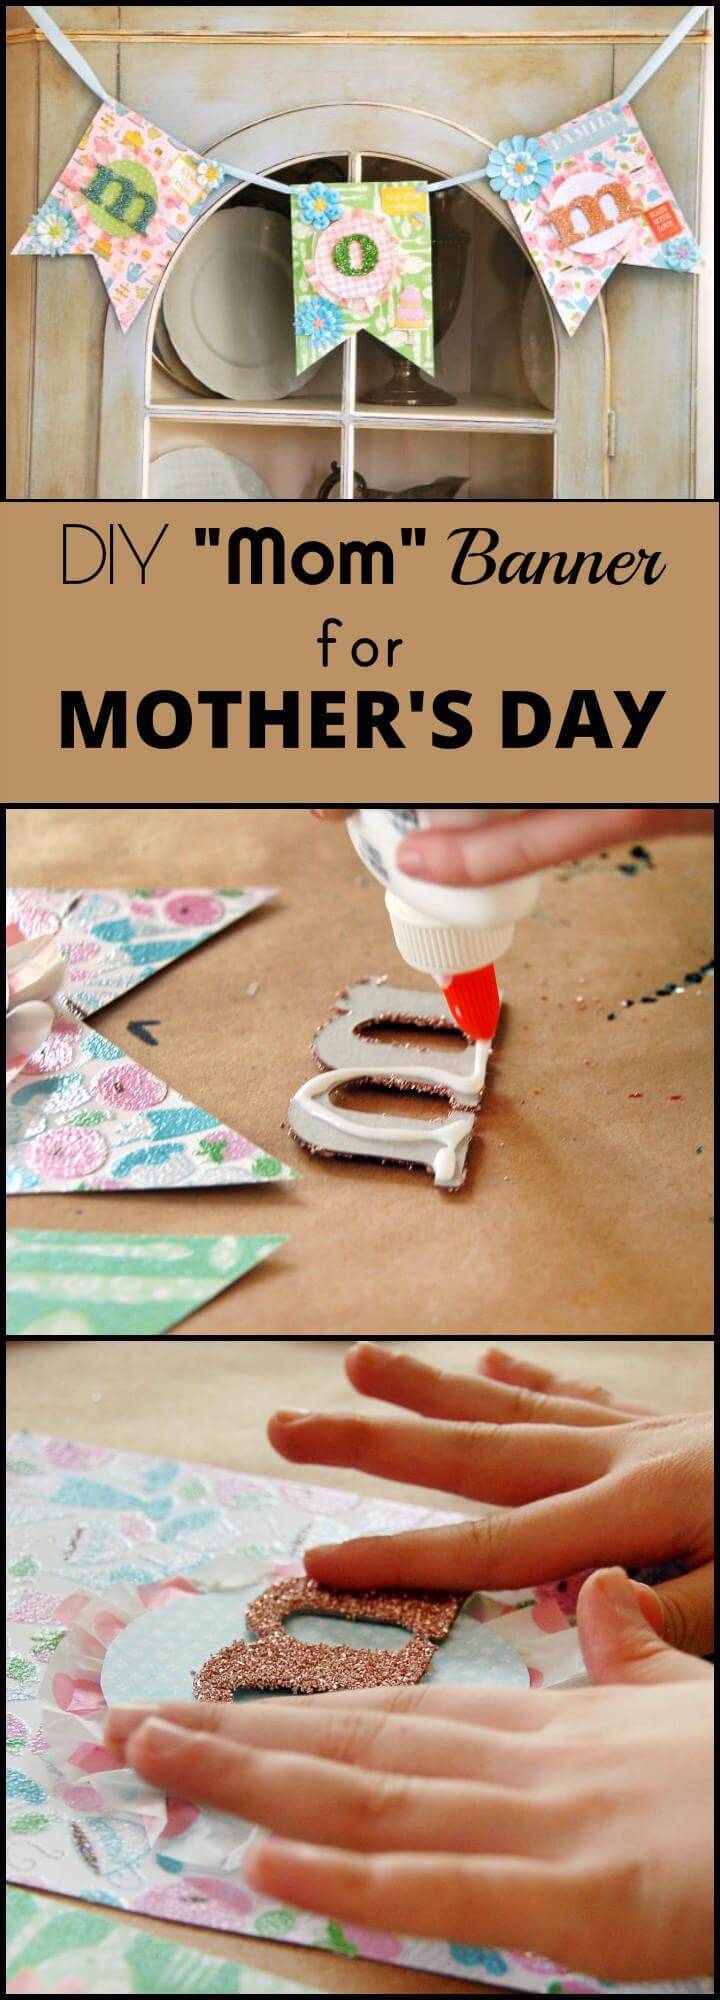 DIY Mom Banner for Mother's Day